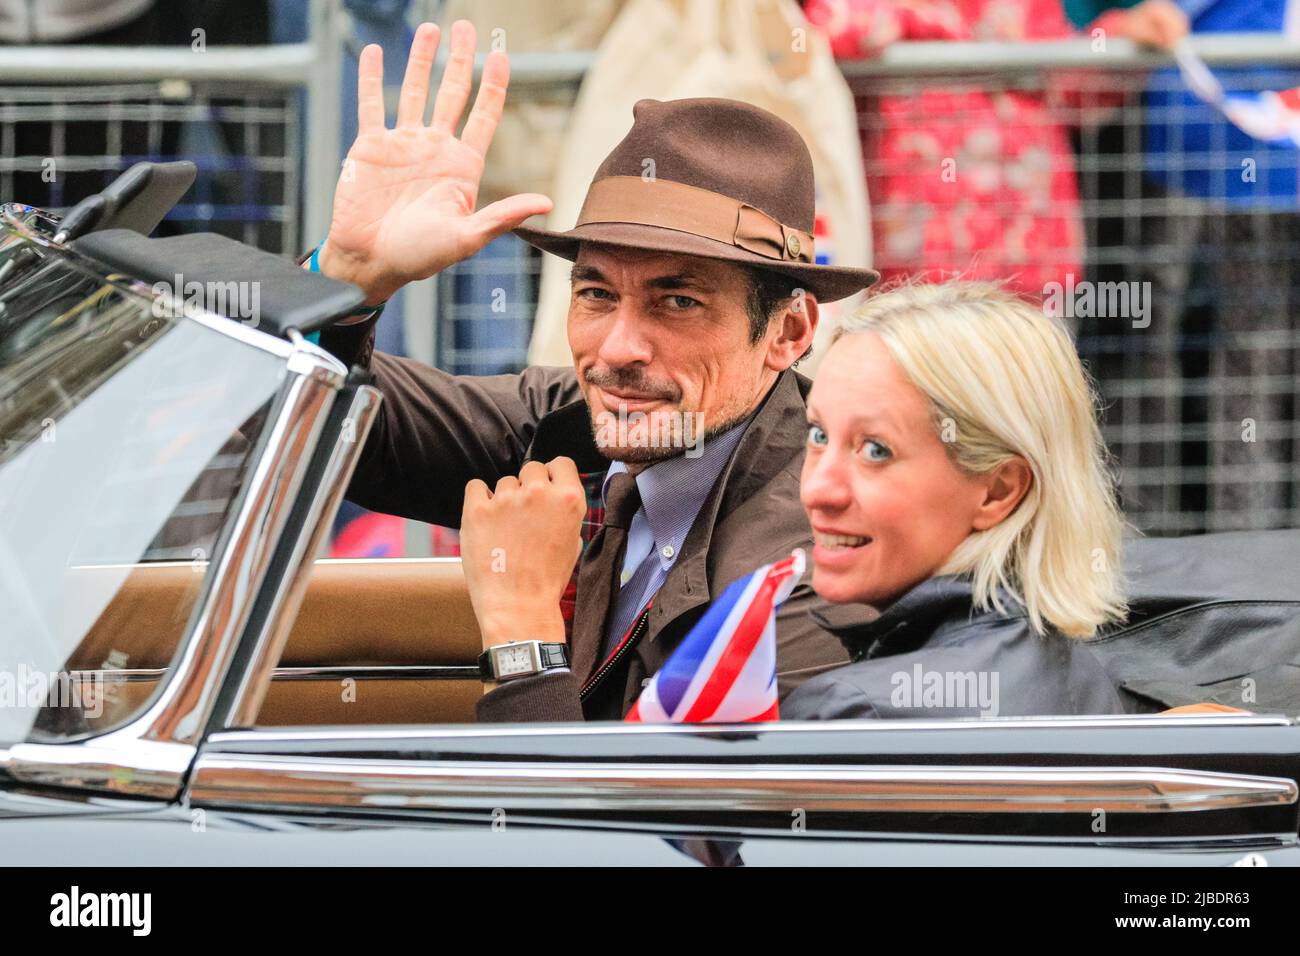 London, UK. 05th June, 2022. Model David Gandy. The Platinum Jubilee Pageant features 10,000 participants in four acts, 'For Queen and Country', a military parade, 'The Time of Our Lives', showing the 7 decades of the Queen's reign, including 150 'national treasure' celebrities and celebrating culture, music and fashion, 'Let's Celebrate', and 'Happy and Glorious', the final forming in front of Buckingham Palace. Credit: Imageplotter/Alamy Live News Stock Photo